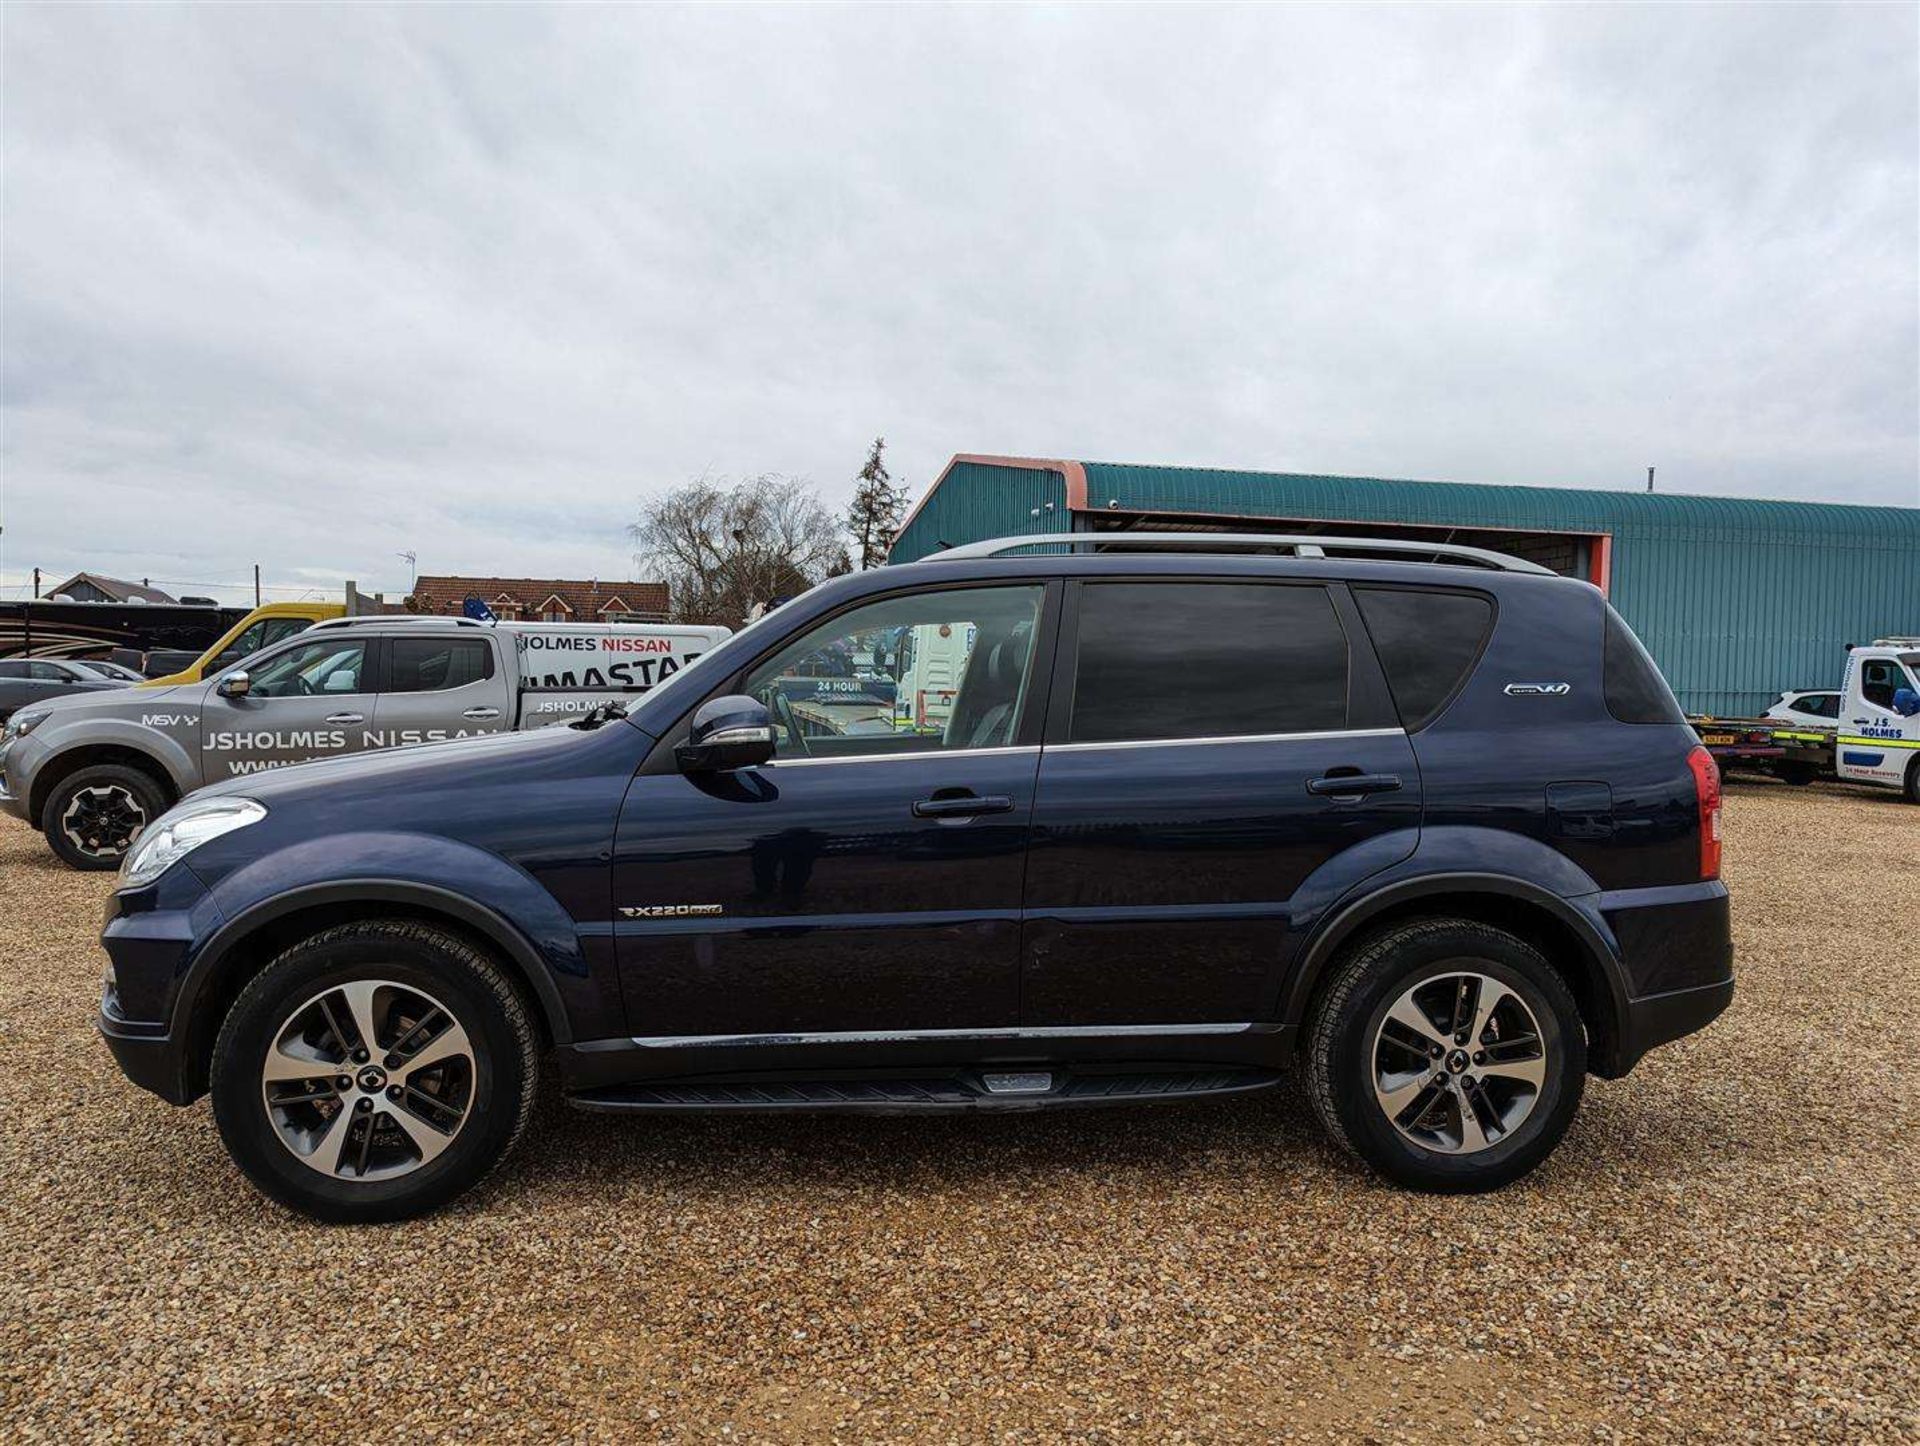 2018 SSANGYONG REXTON EX AUTO - Image 2 of 30